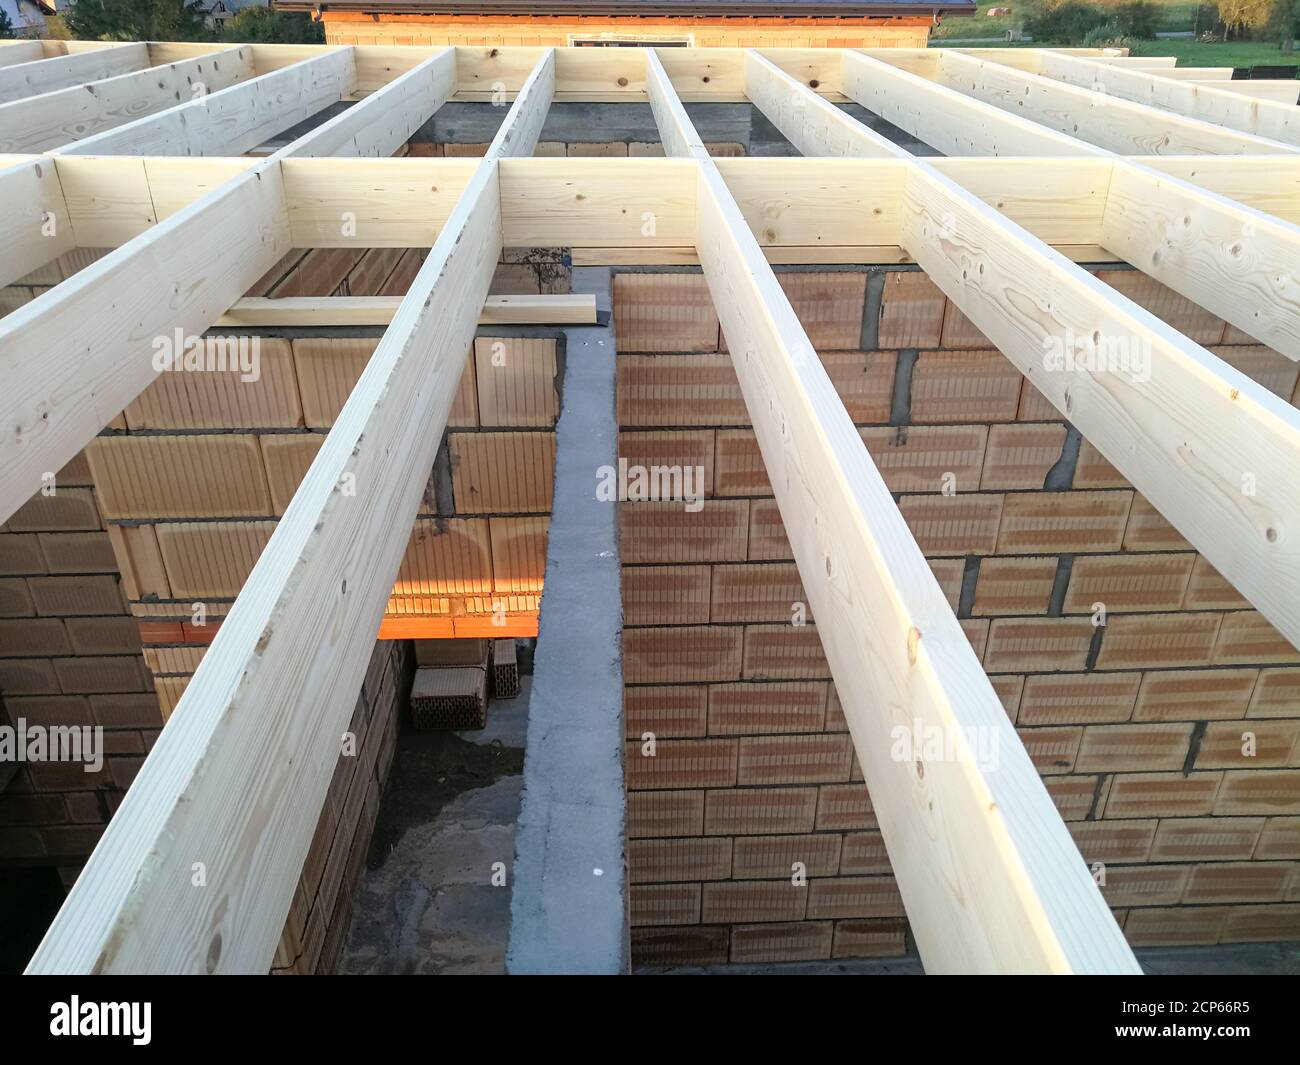 Wood girder beams for new roof construction at construction site Stock Photo